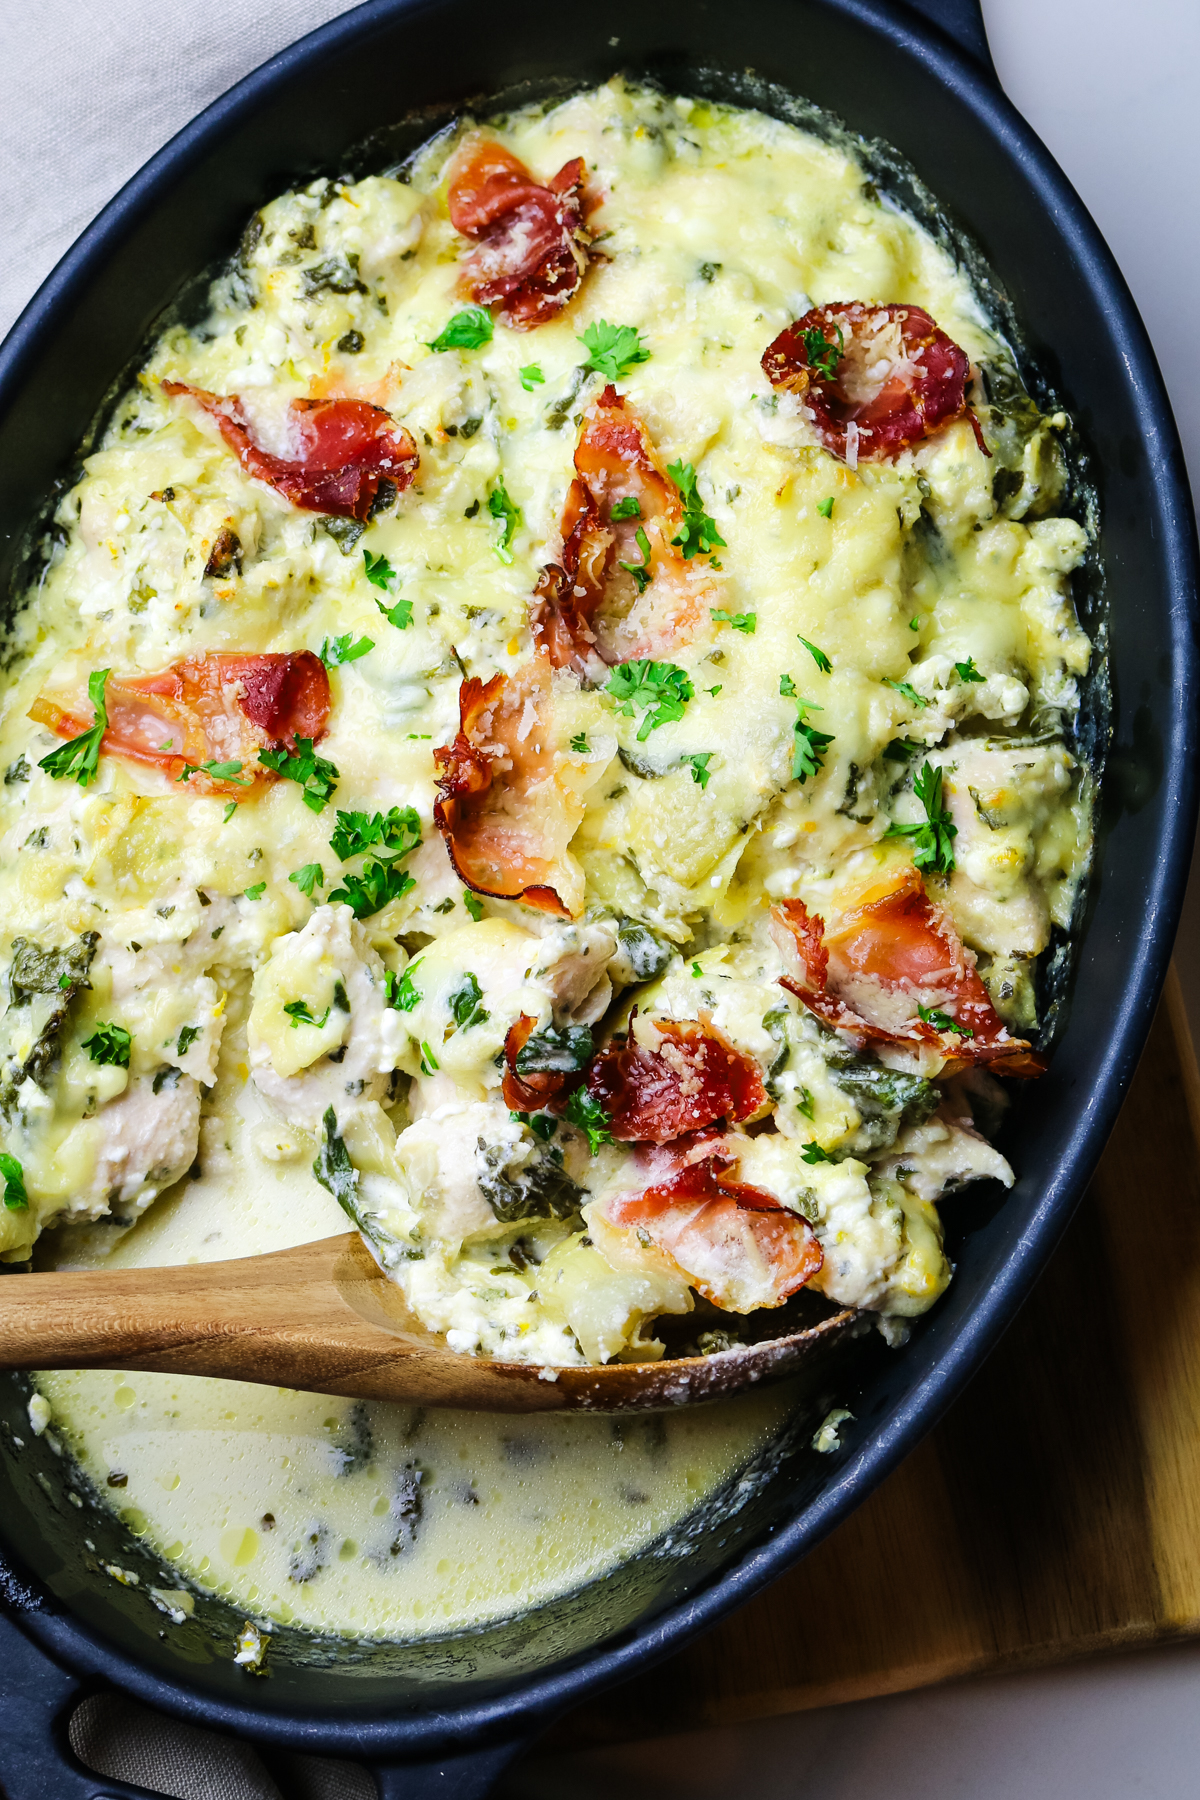 chicken artichoke casserole in black baking dish with prosciutto pieces on top with green parsley.